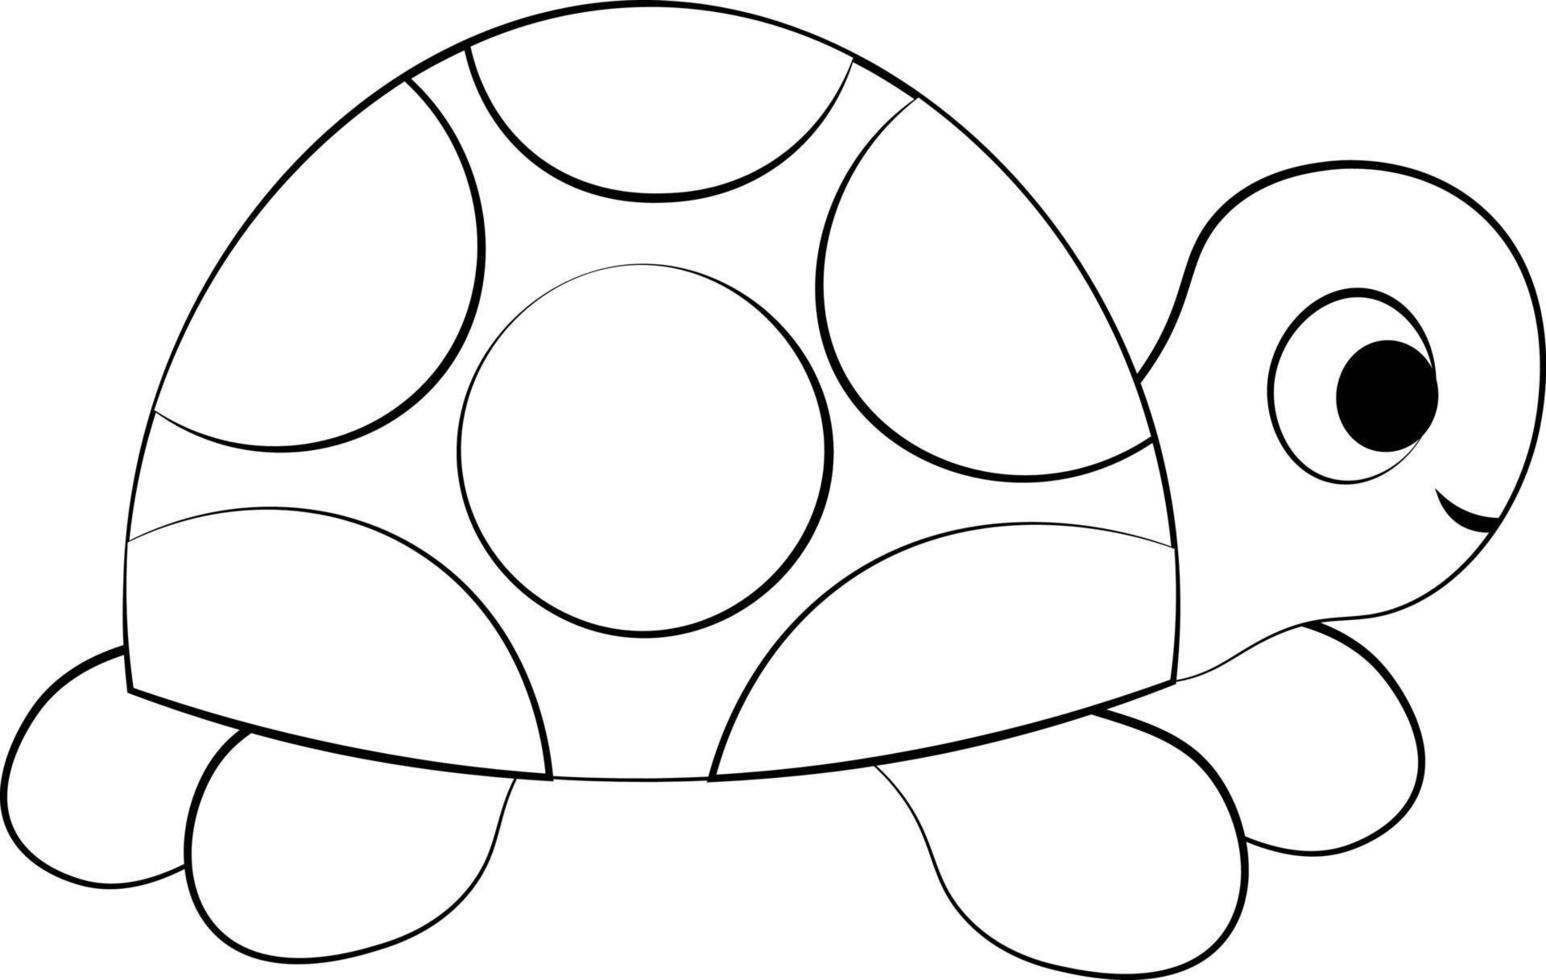 Cute cartoon Turtle. Draw illustration in black and white vector